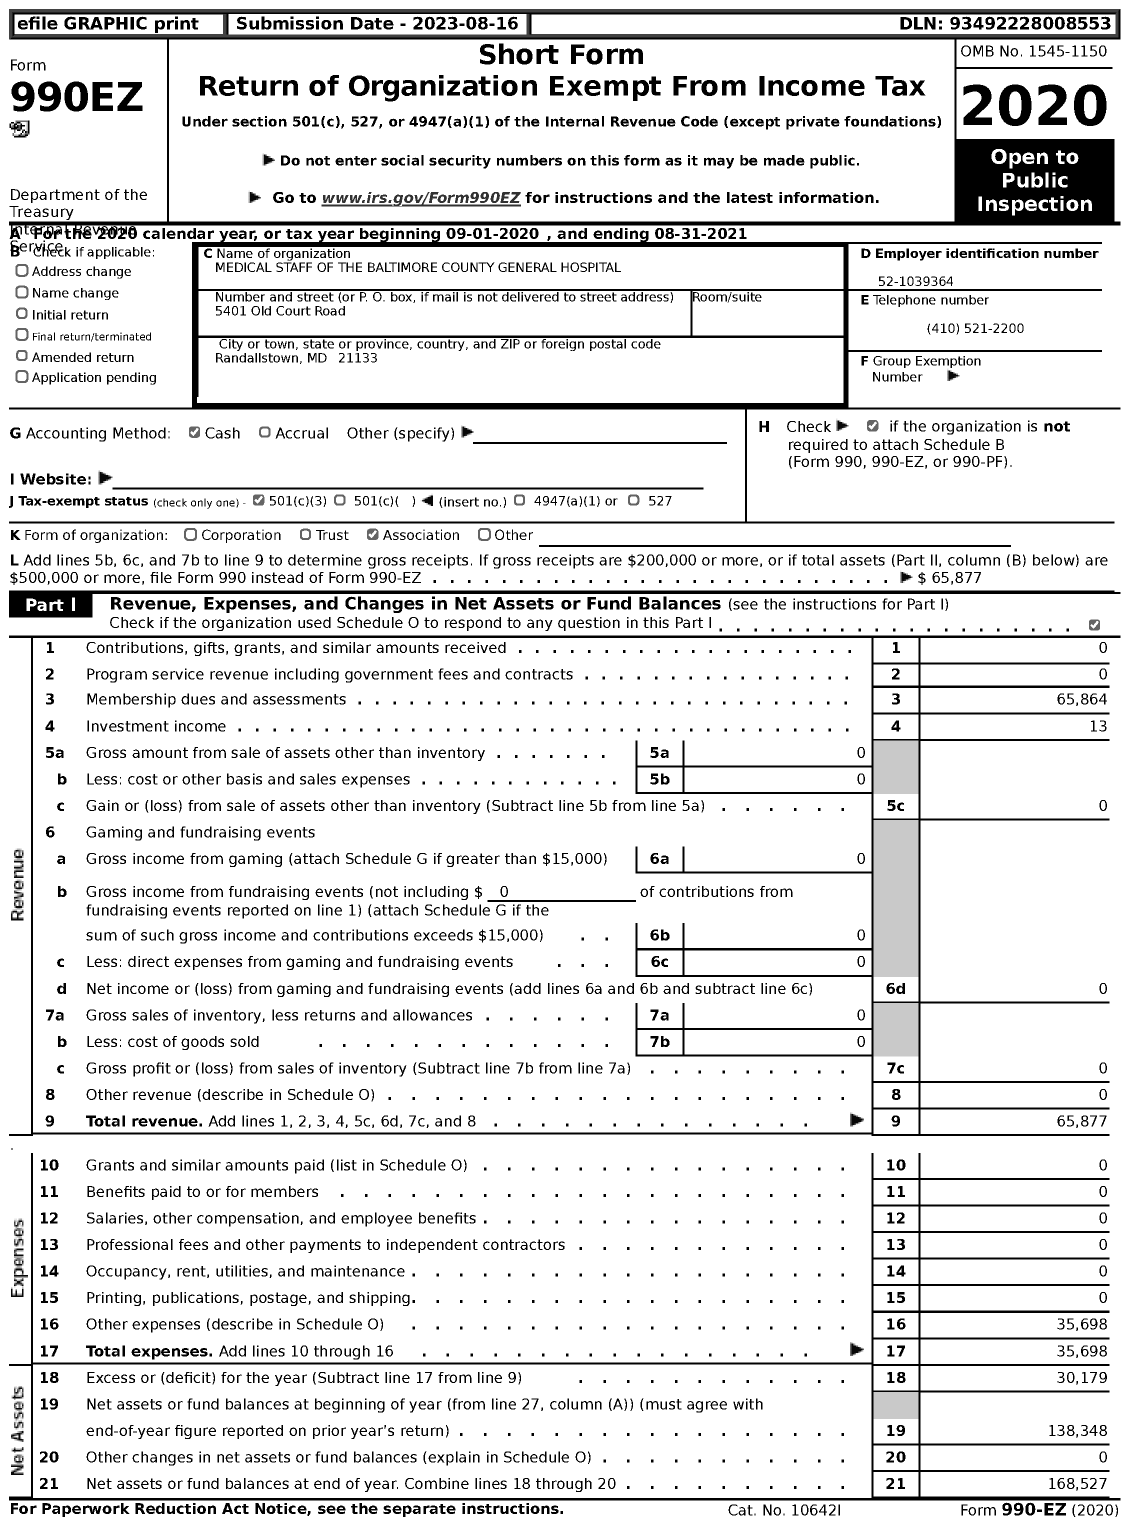 Image of first page of 2020 Form 990EZ for Medical Staff of the Baltimore County General Hospital